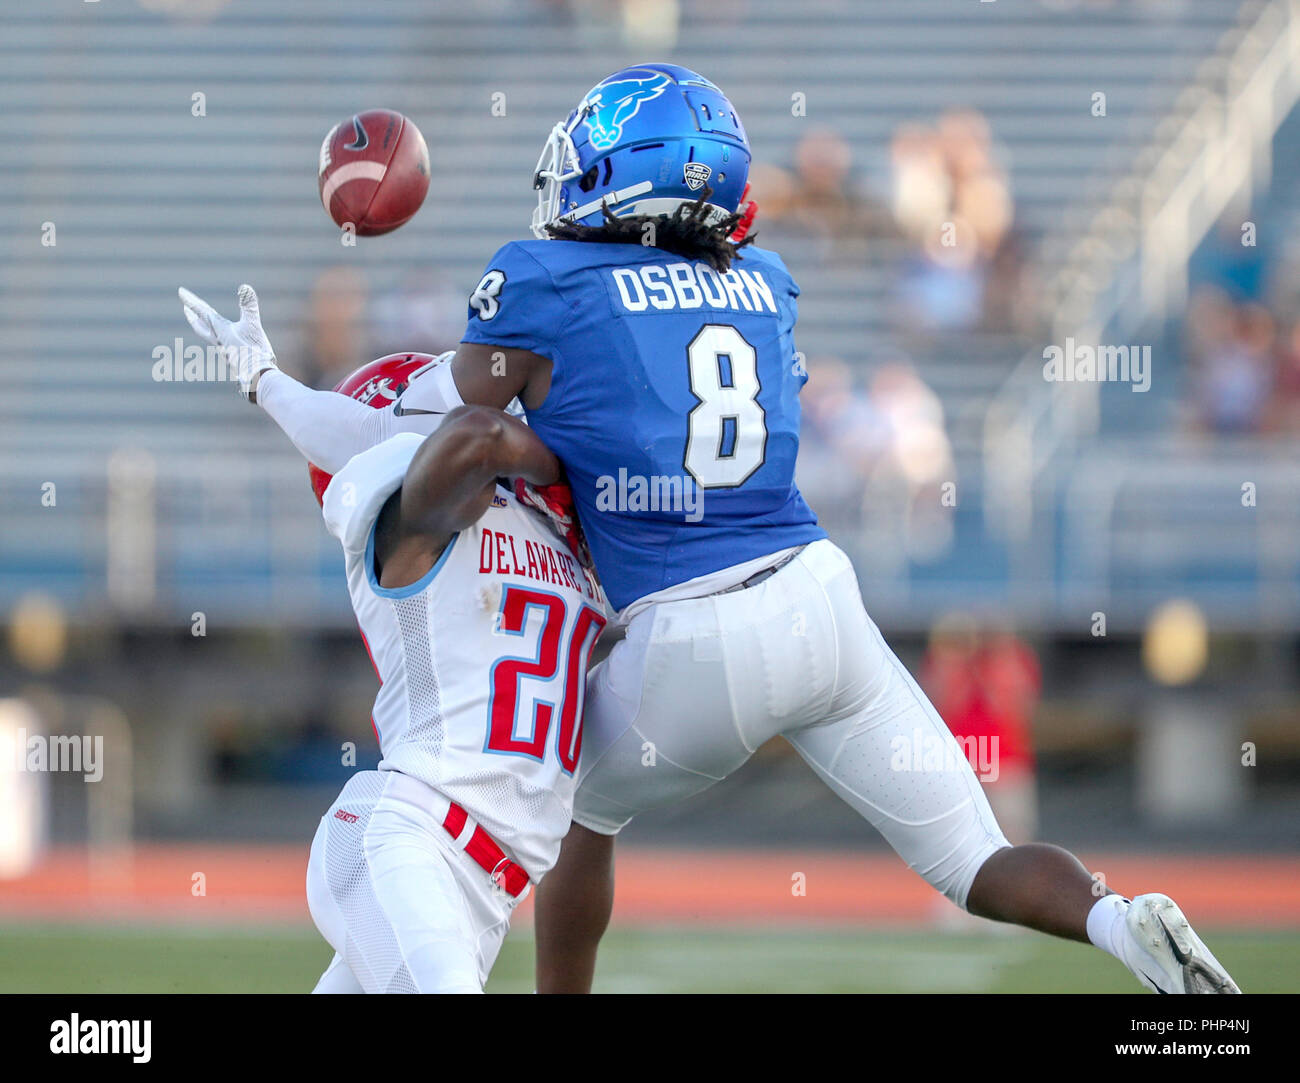 Amherst, USA. 1st September 2018. Buffalo Bulls wide receiver K.J. Osborn (8) goes up to catch a pass against Delaware State Hornets defensive back Keyjuan Selby (20) during the first half of play in the NCAA football game between the Delaware State Hornets and Buffalo Bulls at UB Stadium in Amherst, N.Y. (Nicholas T. LoVerde/Cal Sport Media) Credit: Cal Sport Media/Alamy Live News Stock Photo